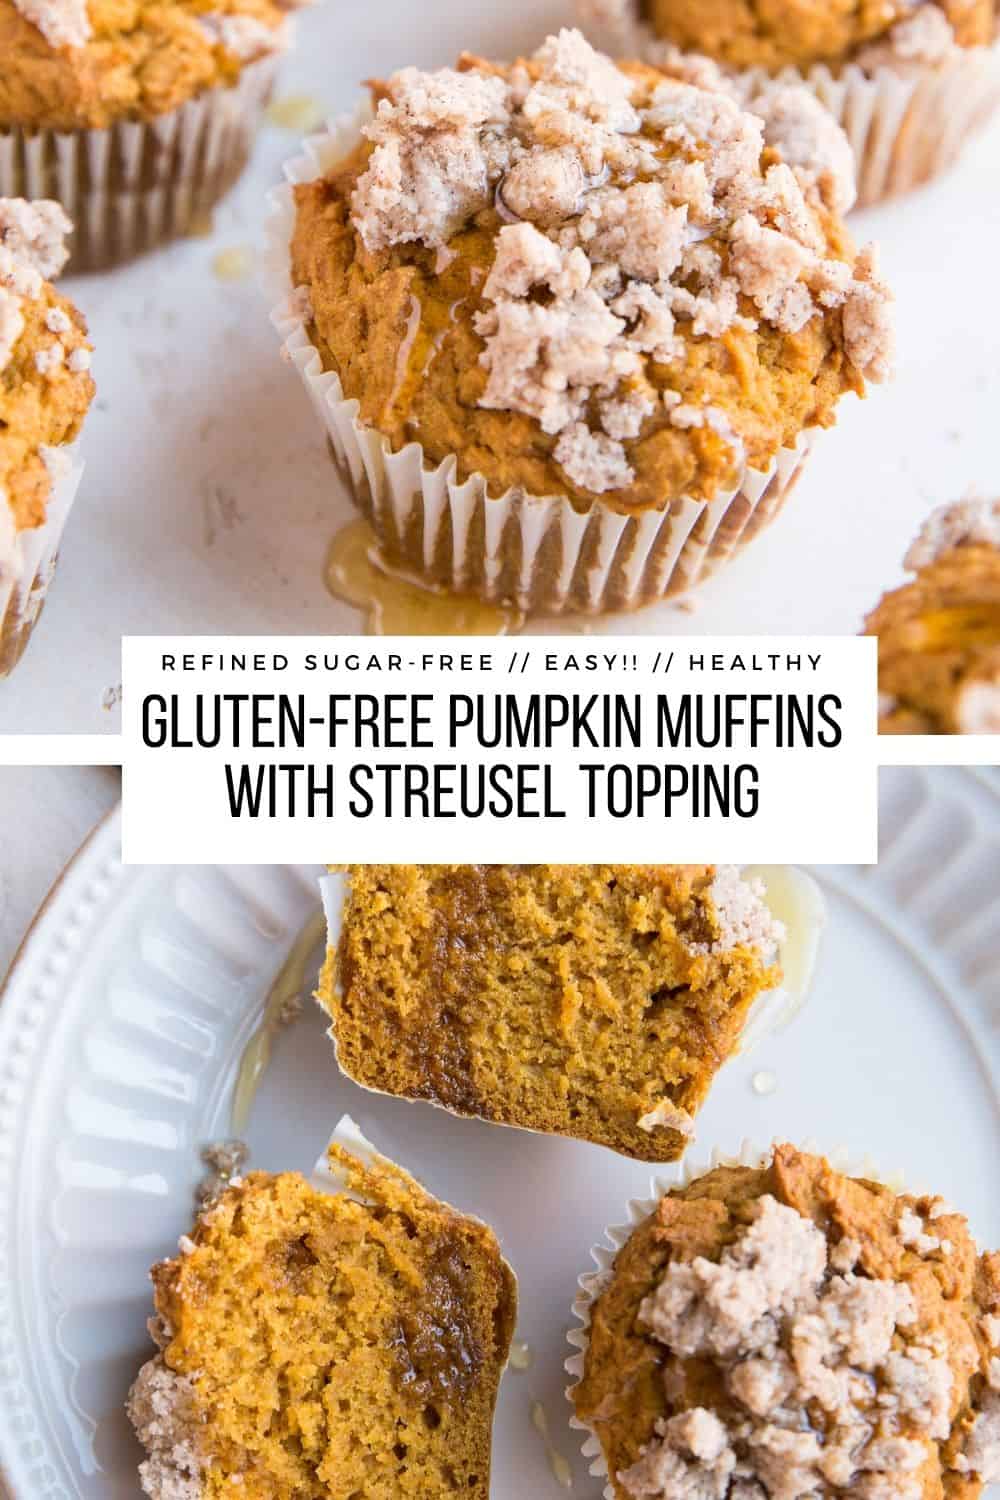 Gluten-Free Pumpkin Muffins with Streusel Topping - The Roasted Root